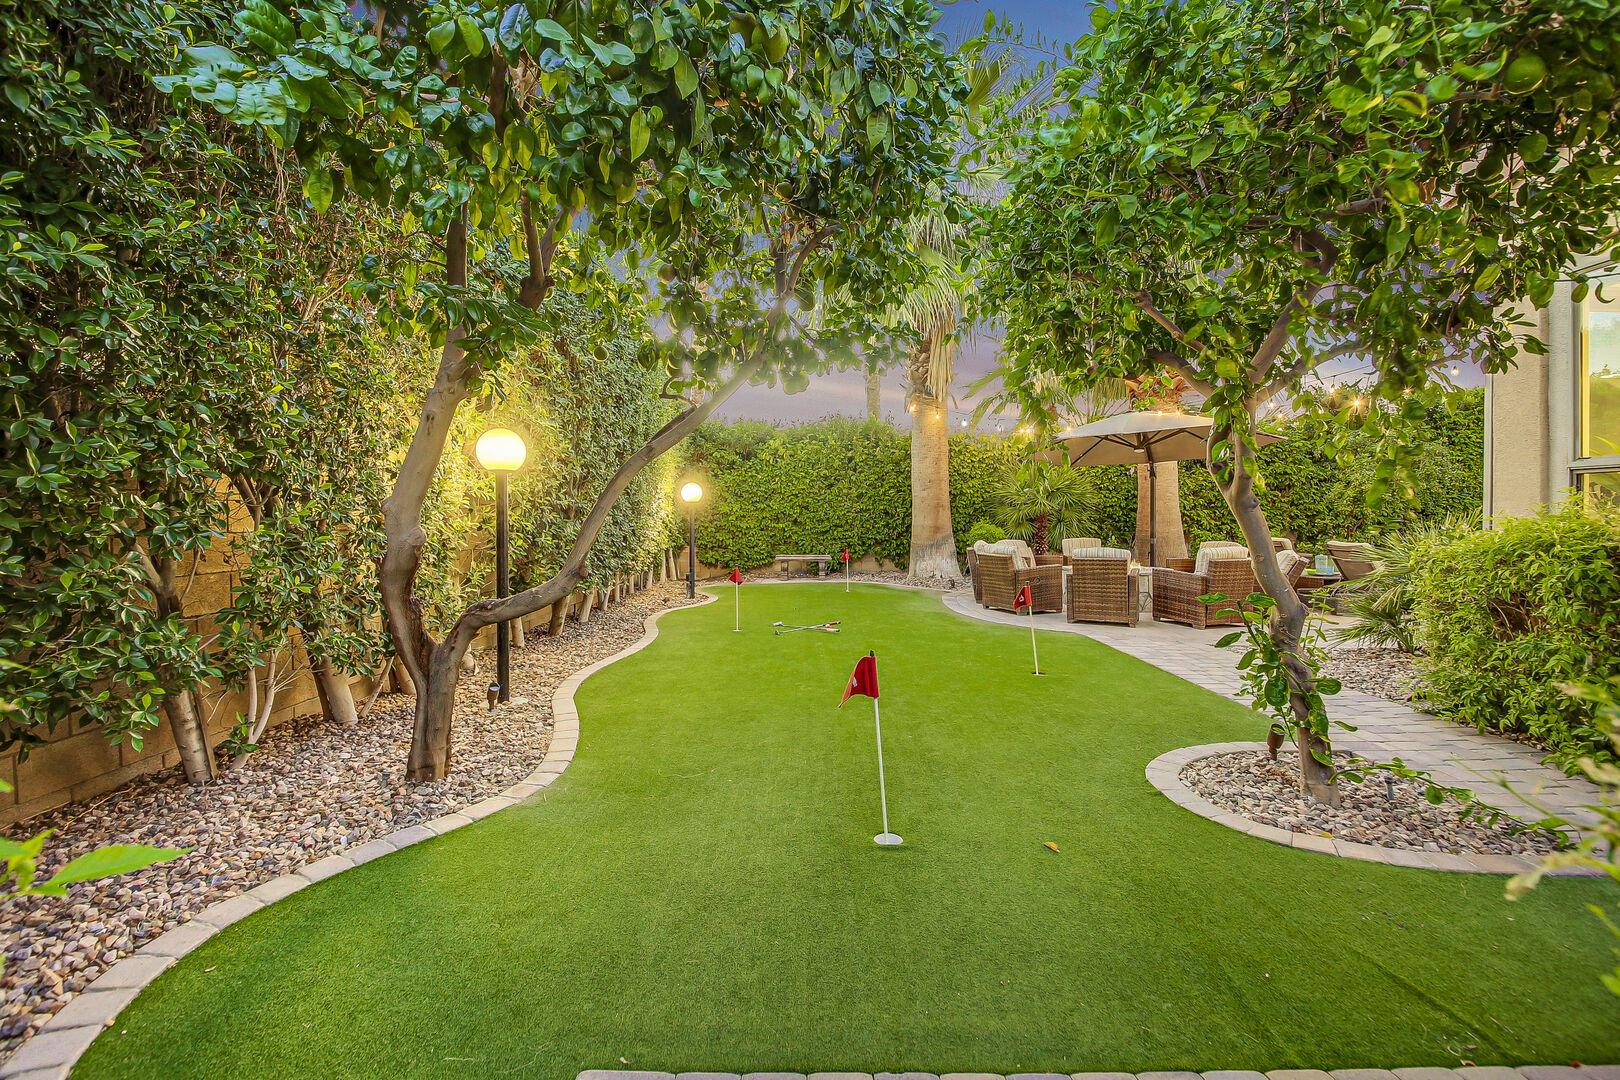 Put your skills to the test on the putting green.